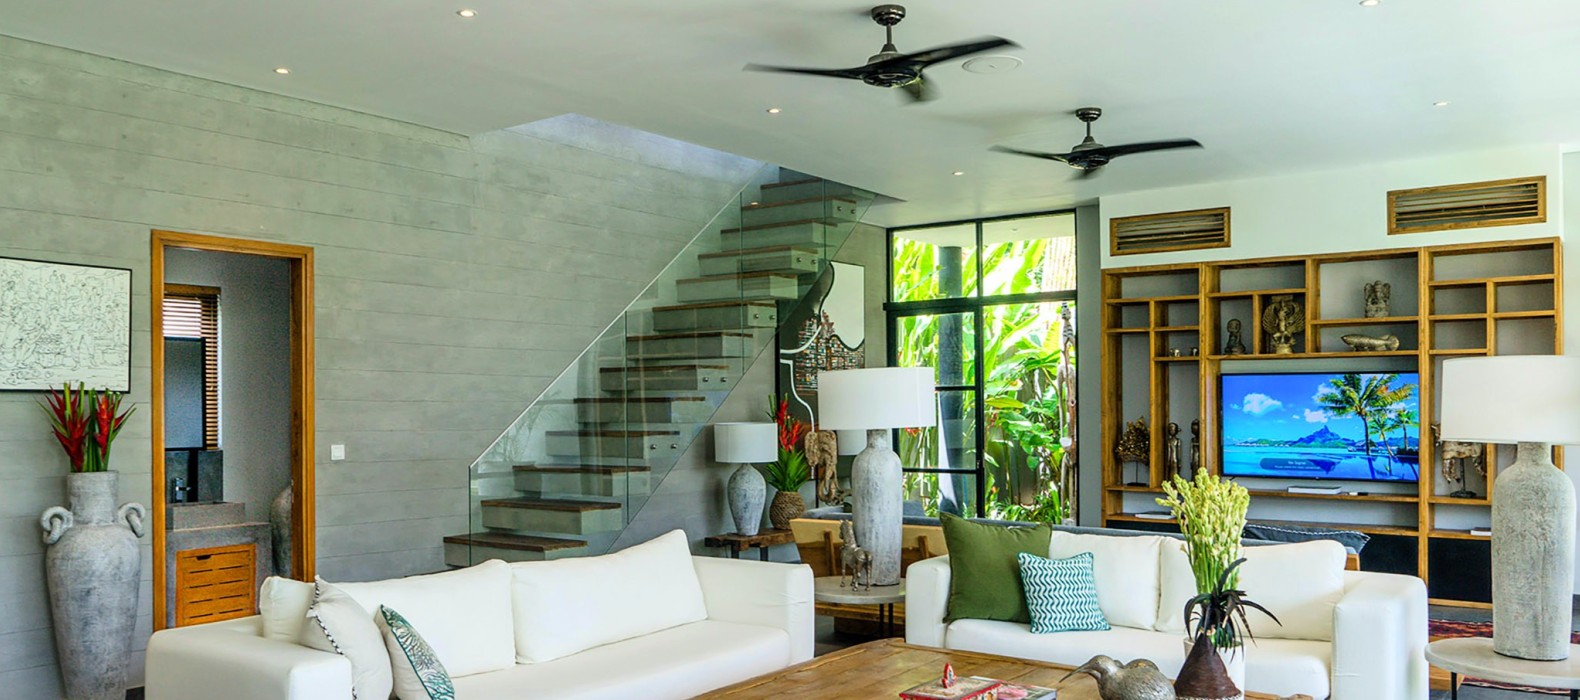 Living room view of Villa Skybound in Bali